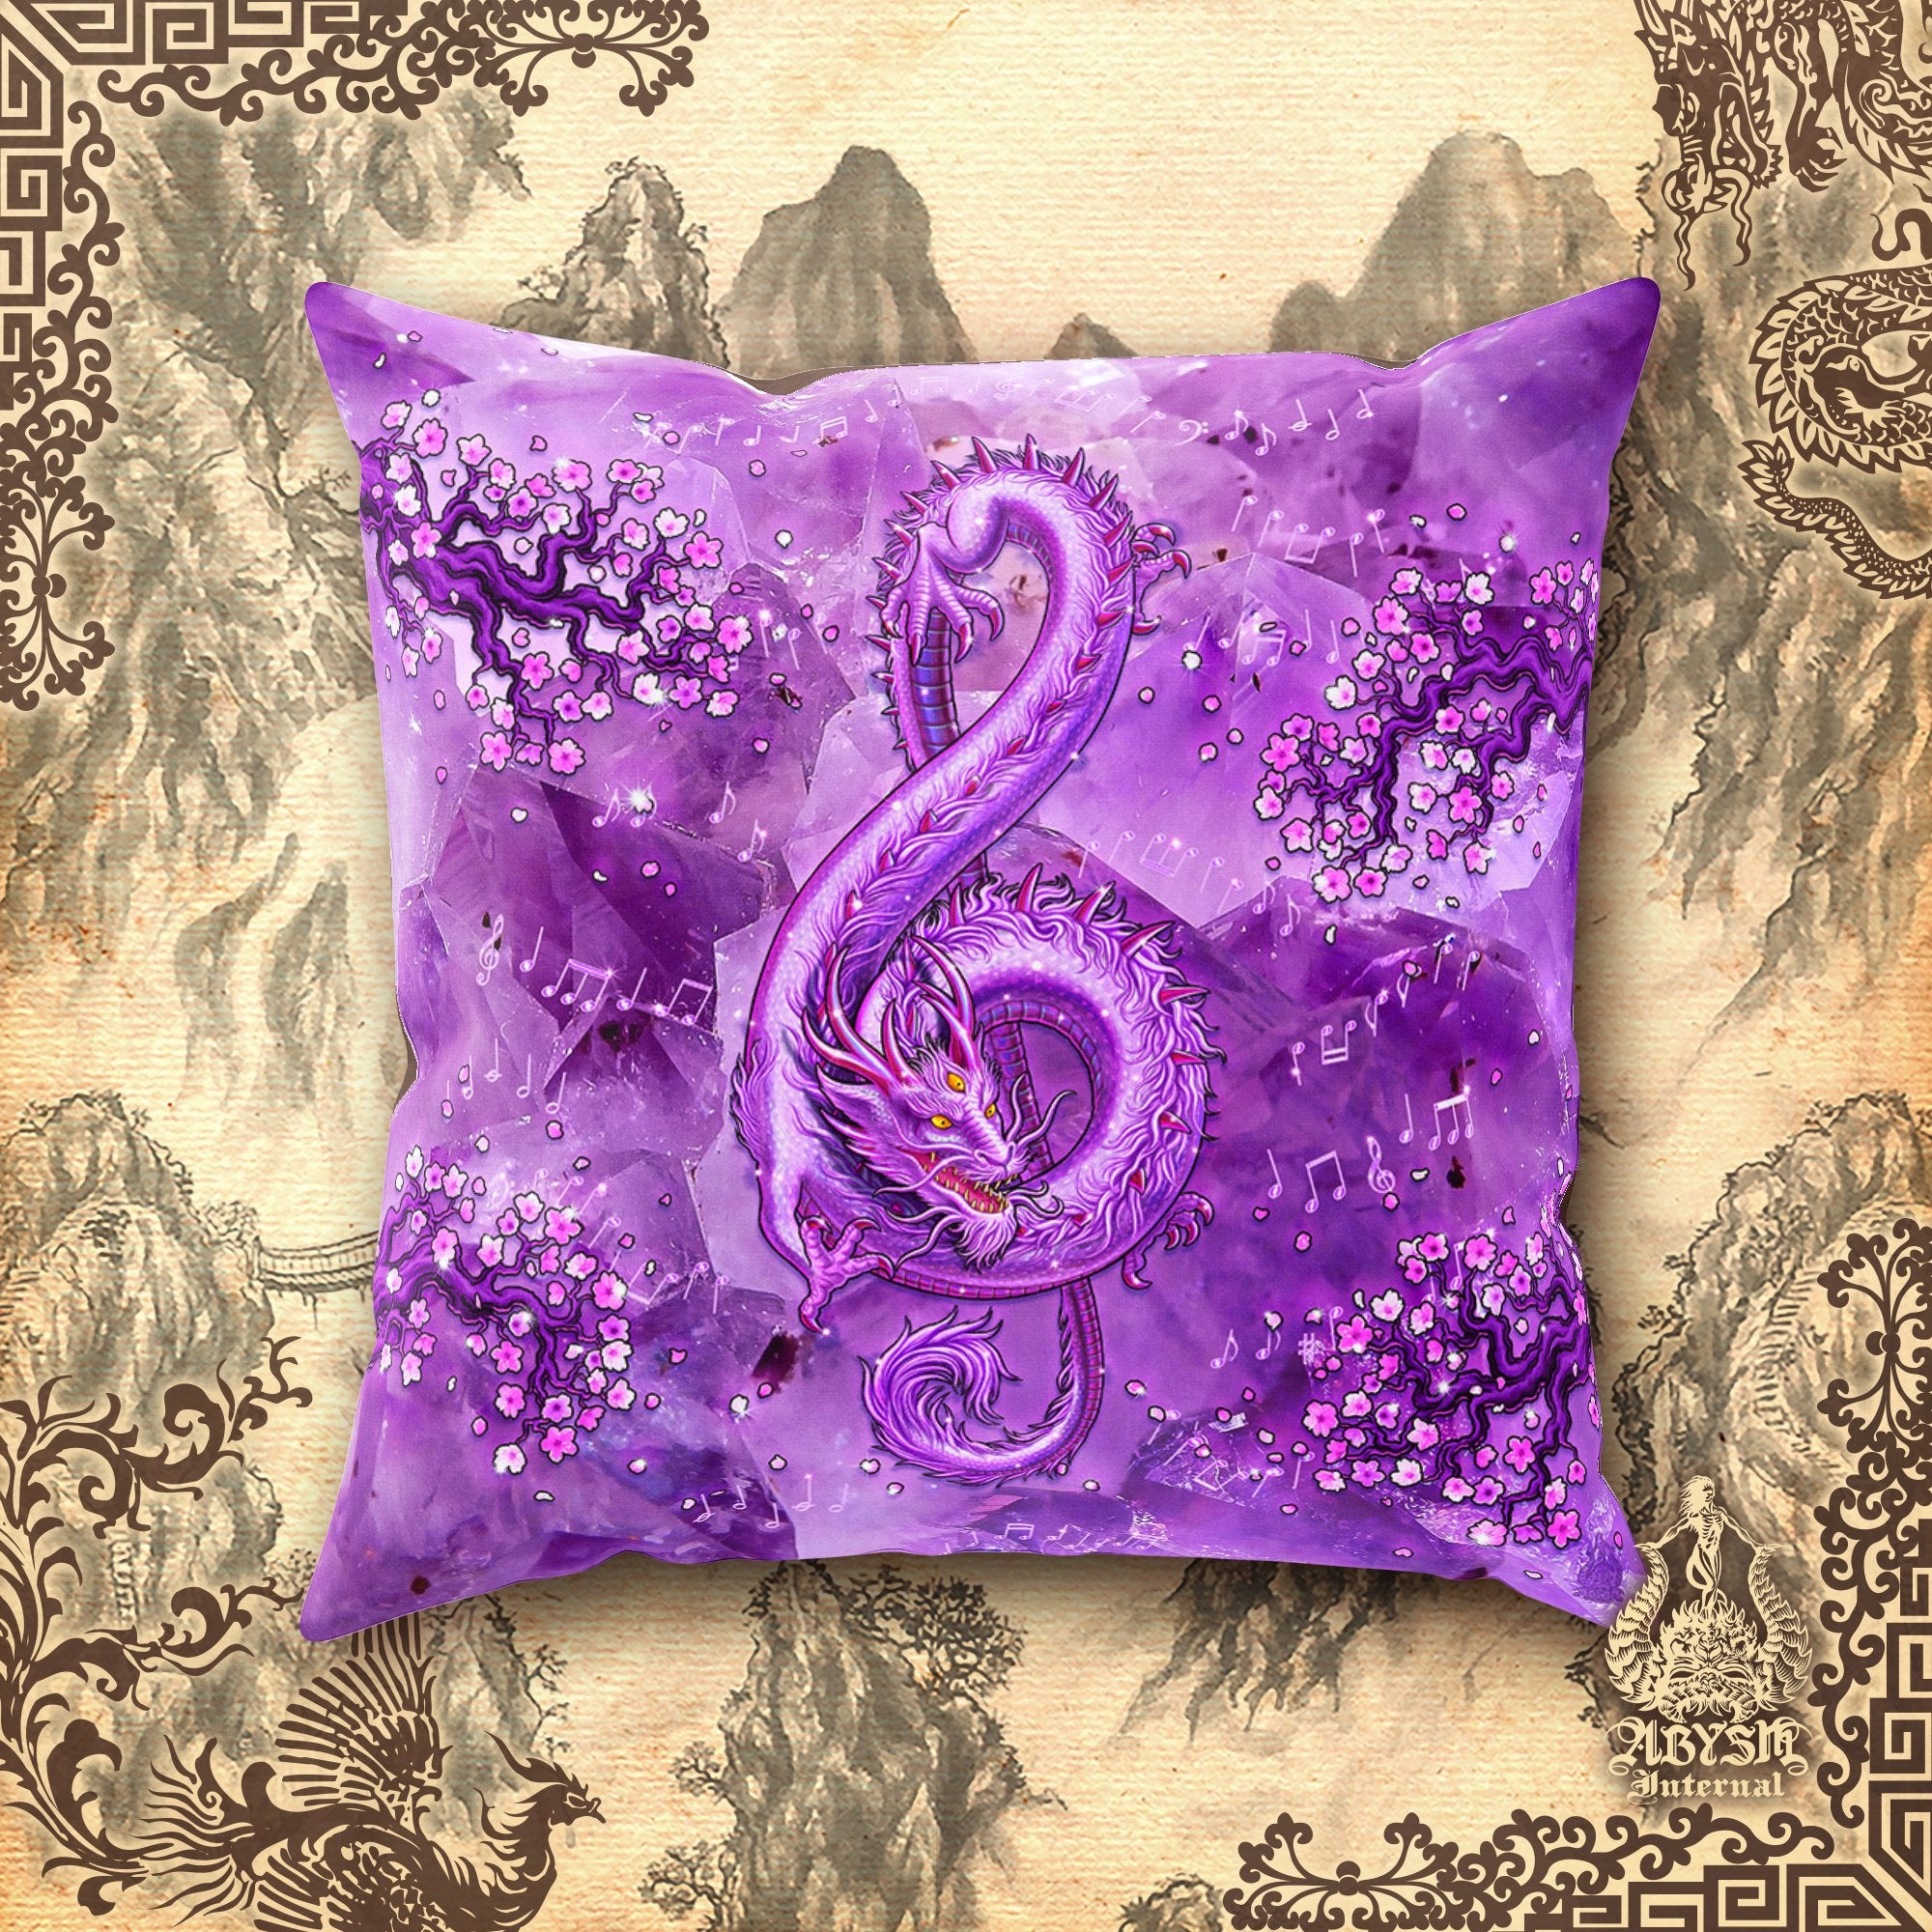 Eclectic Throw Pillow, Decorative Accent Pillow, Square Cushion Cover, Indie Design, Music Room Decor - Treble Clef Dragon, Gemstone, 8 Colors - Abysm Internal